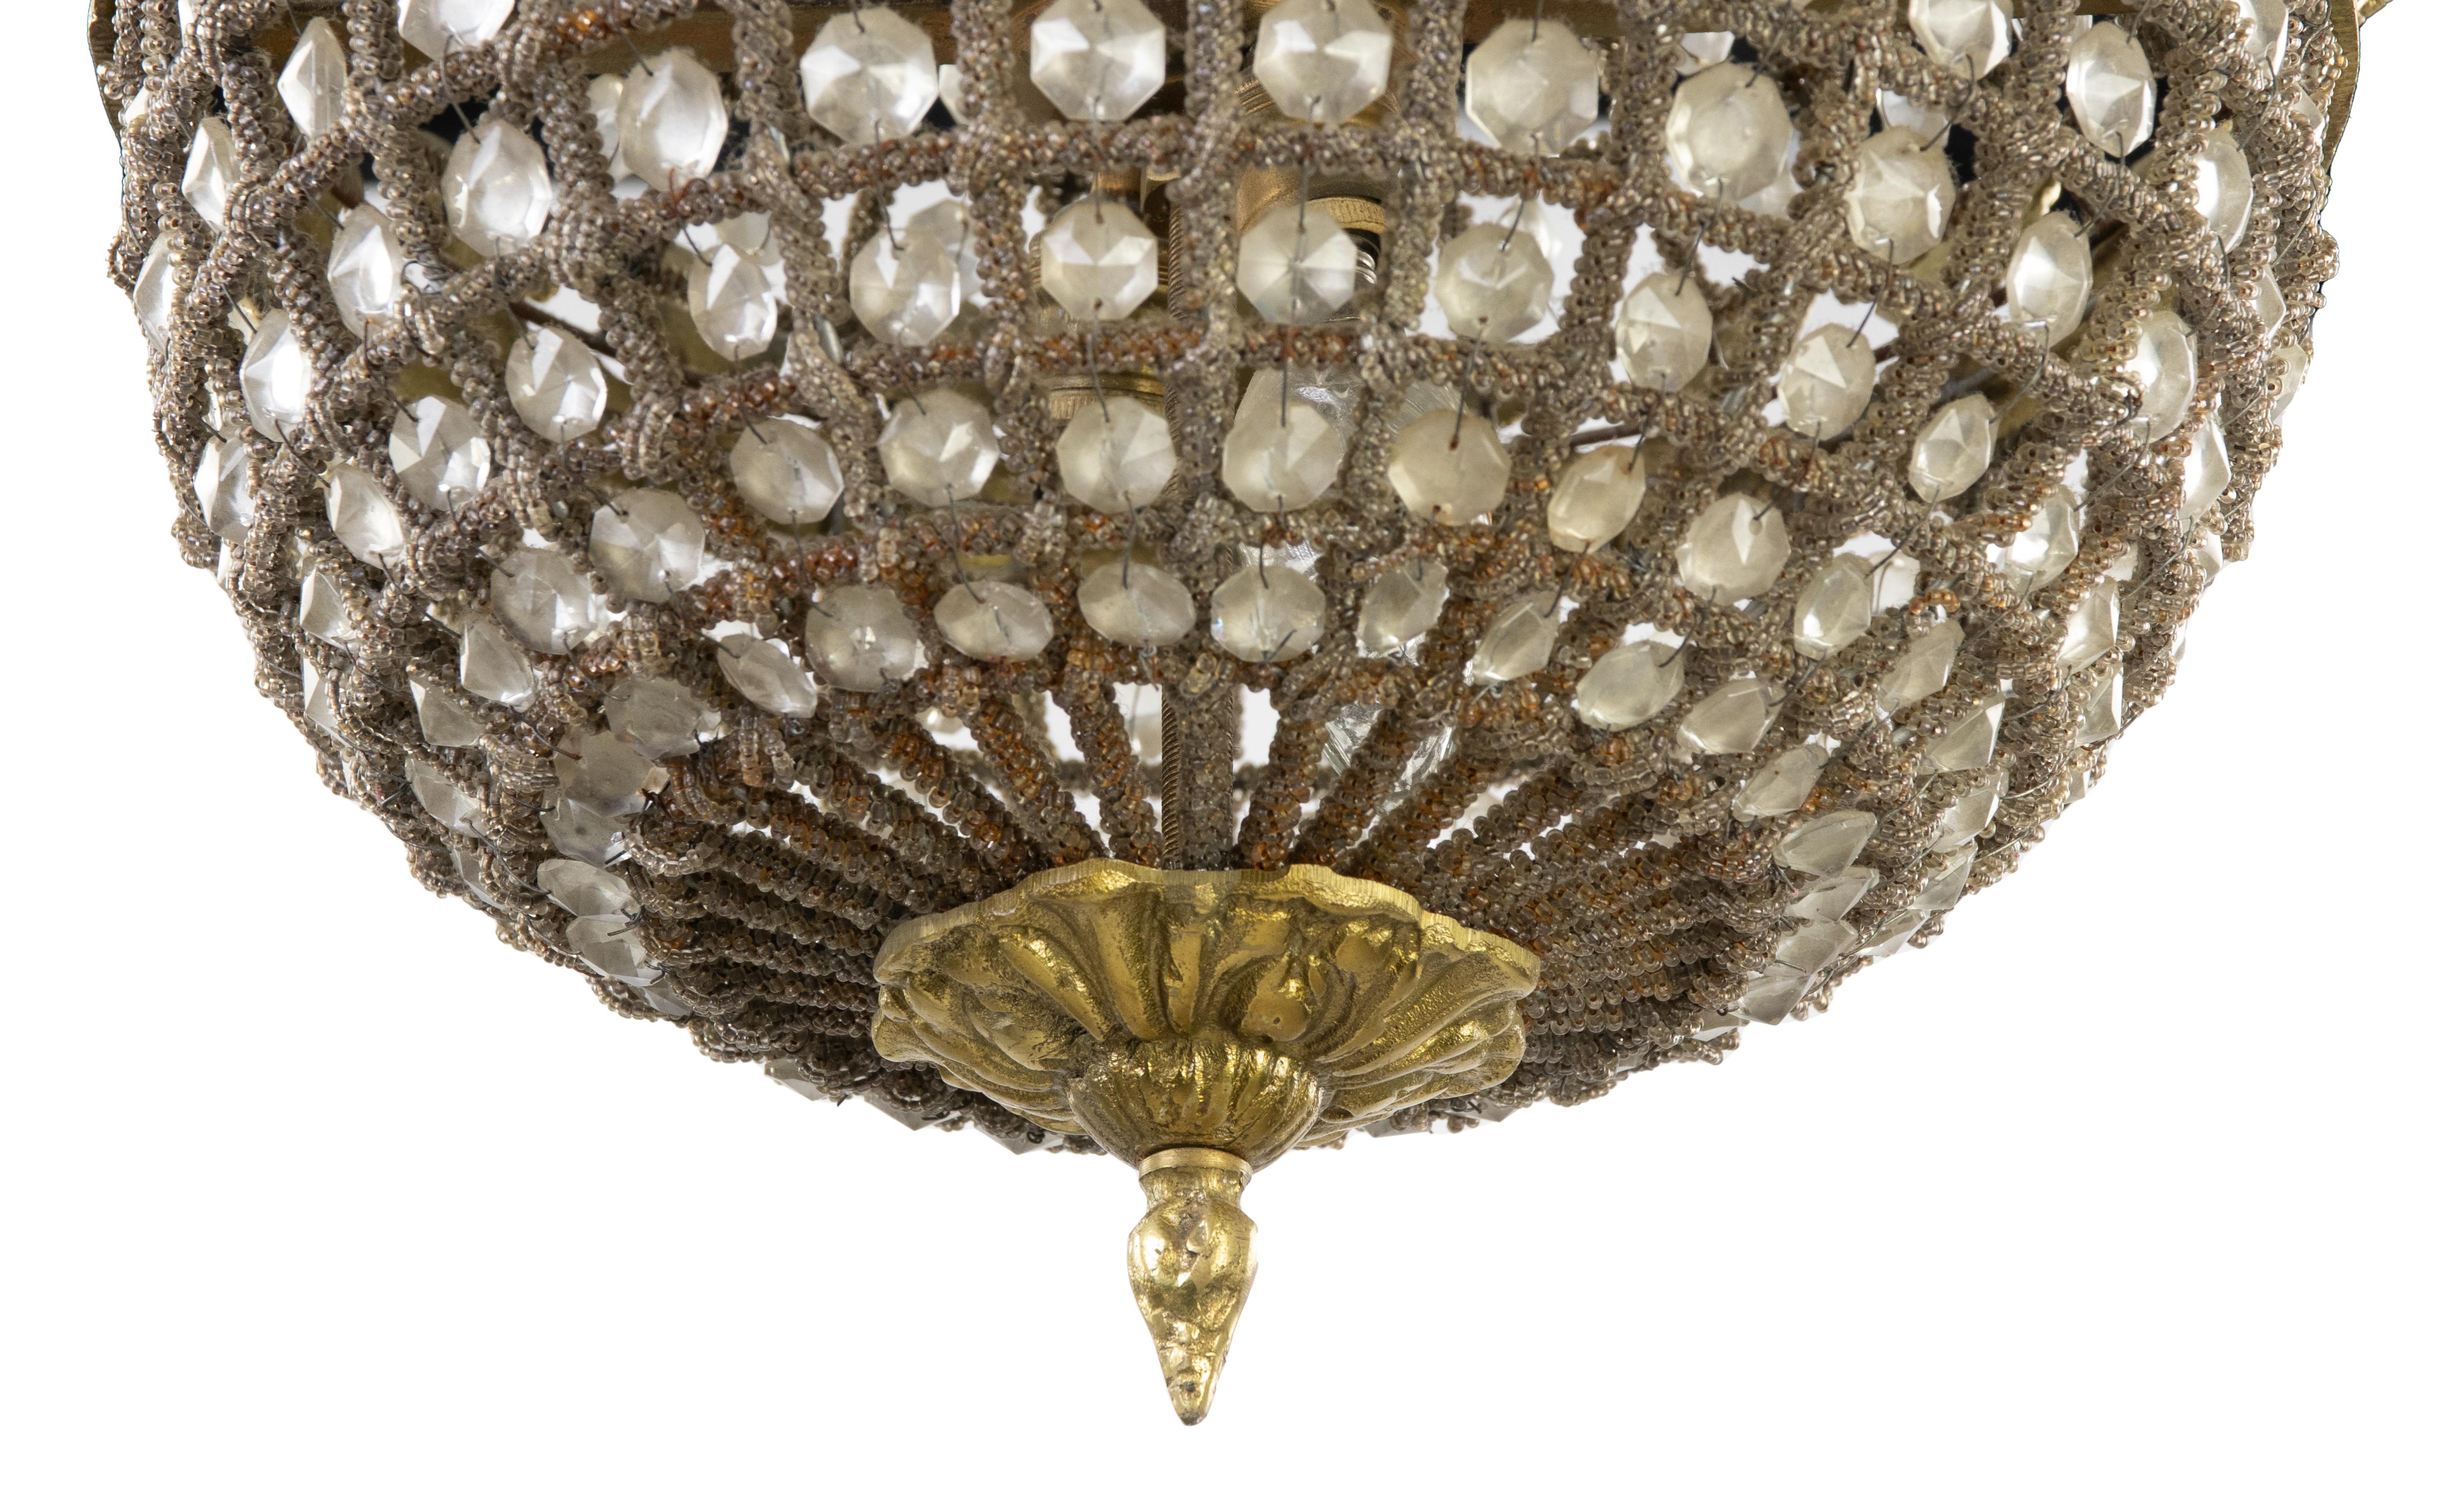  French Empire Style Baloon Chandelier, France Early 20th Century For Sale 1